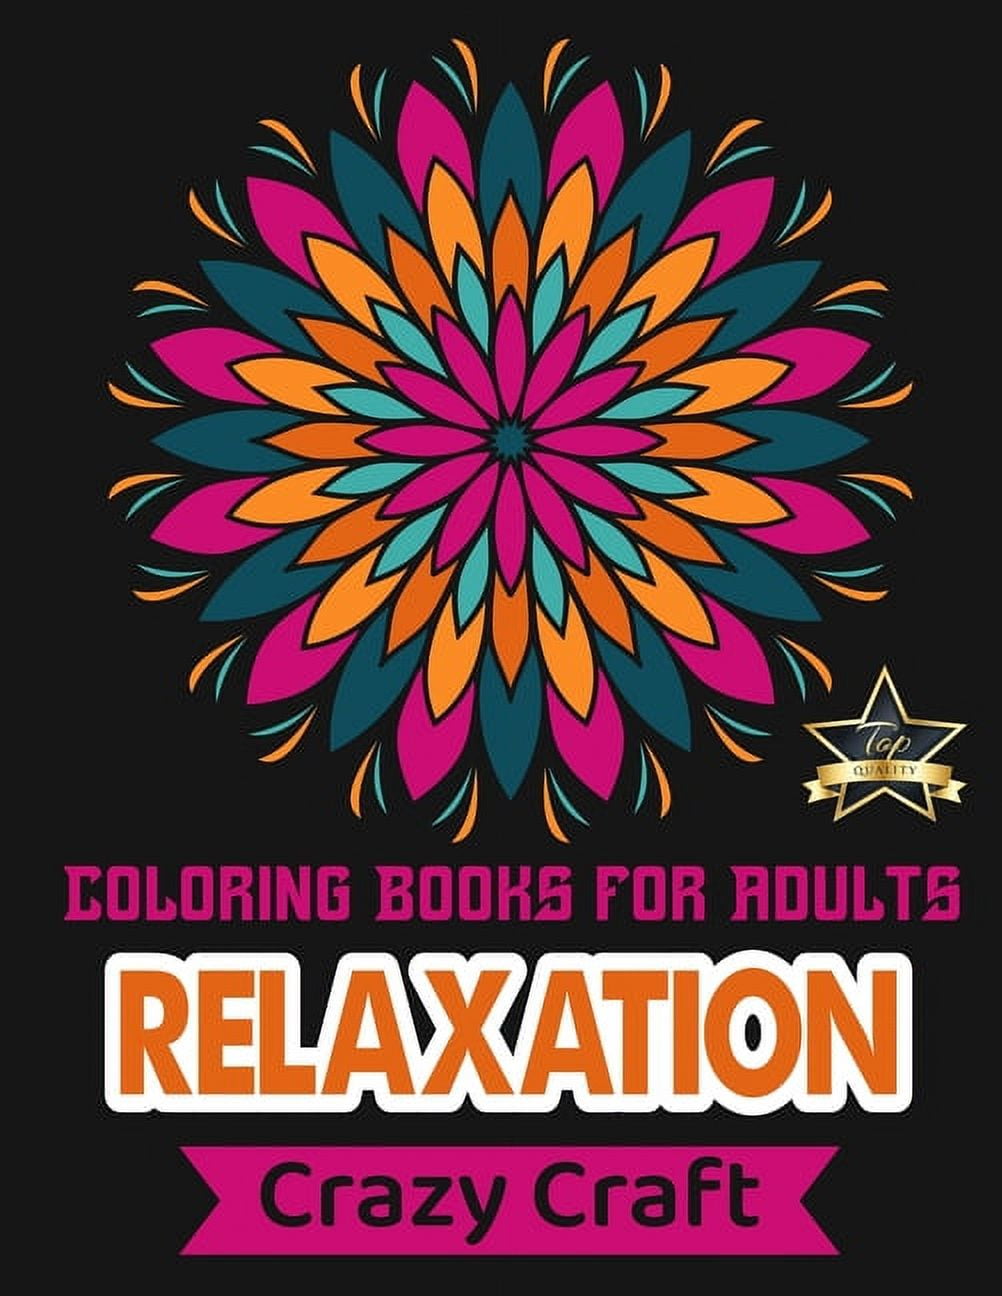 Coloring Book For Adults Relaxation: Relax and Get Creative With Lovable Unique Designs, Shapes and Patterns And So Much More!: Coloring Book For Adults [Book]